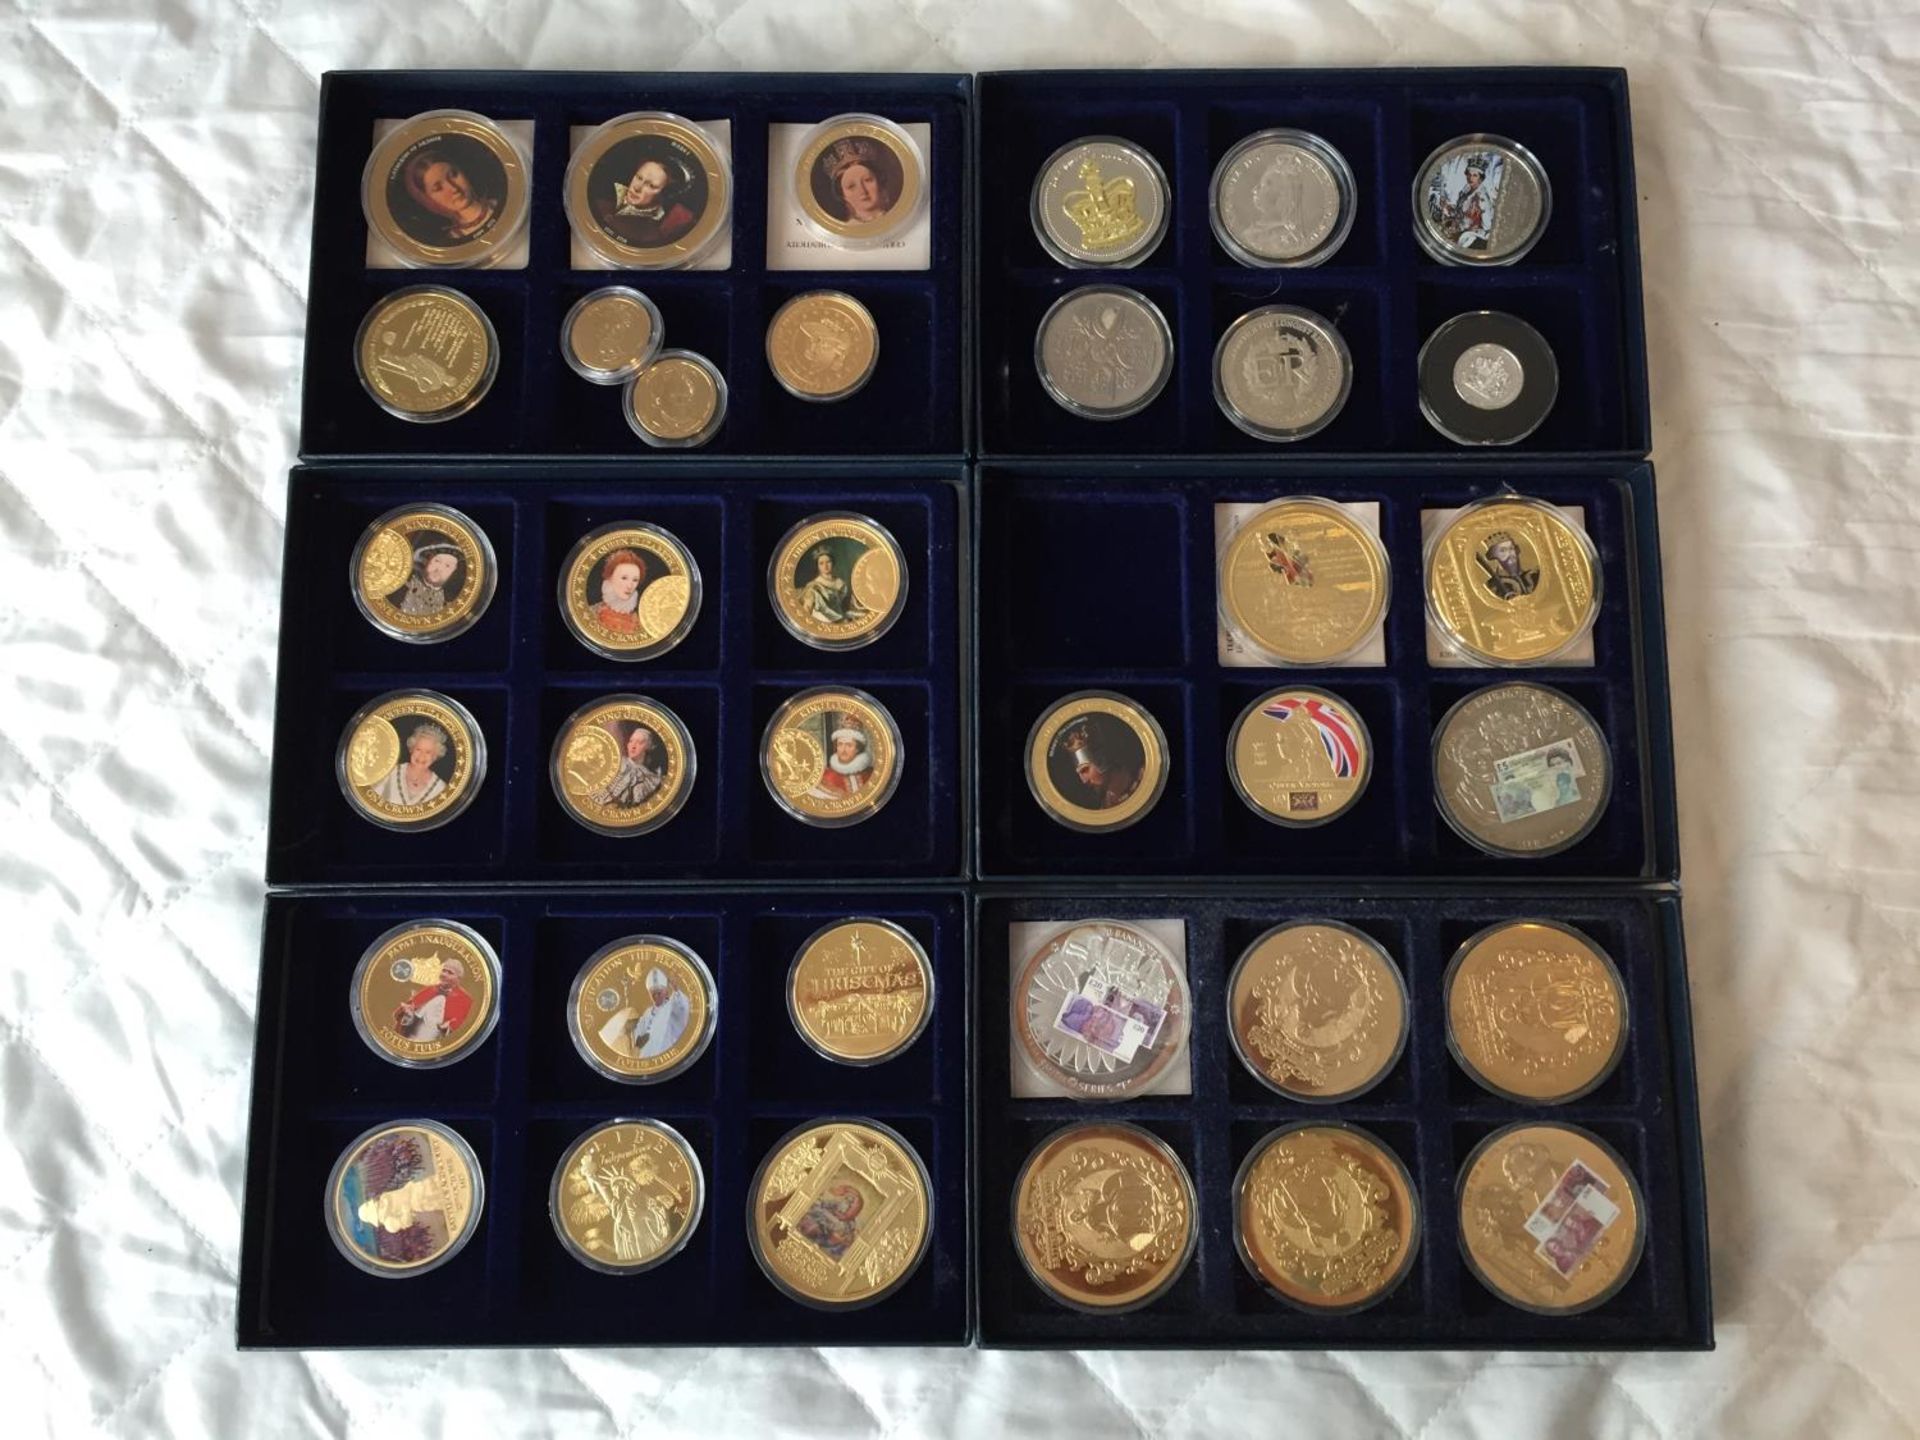 A COLLECTION OF COMMEMORATIVE COINS MOSTLY REPRESENTING VARIOUS MONARCHS ETC. IN CAPSULES, SOME